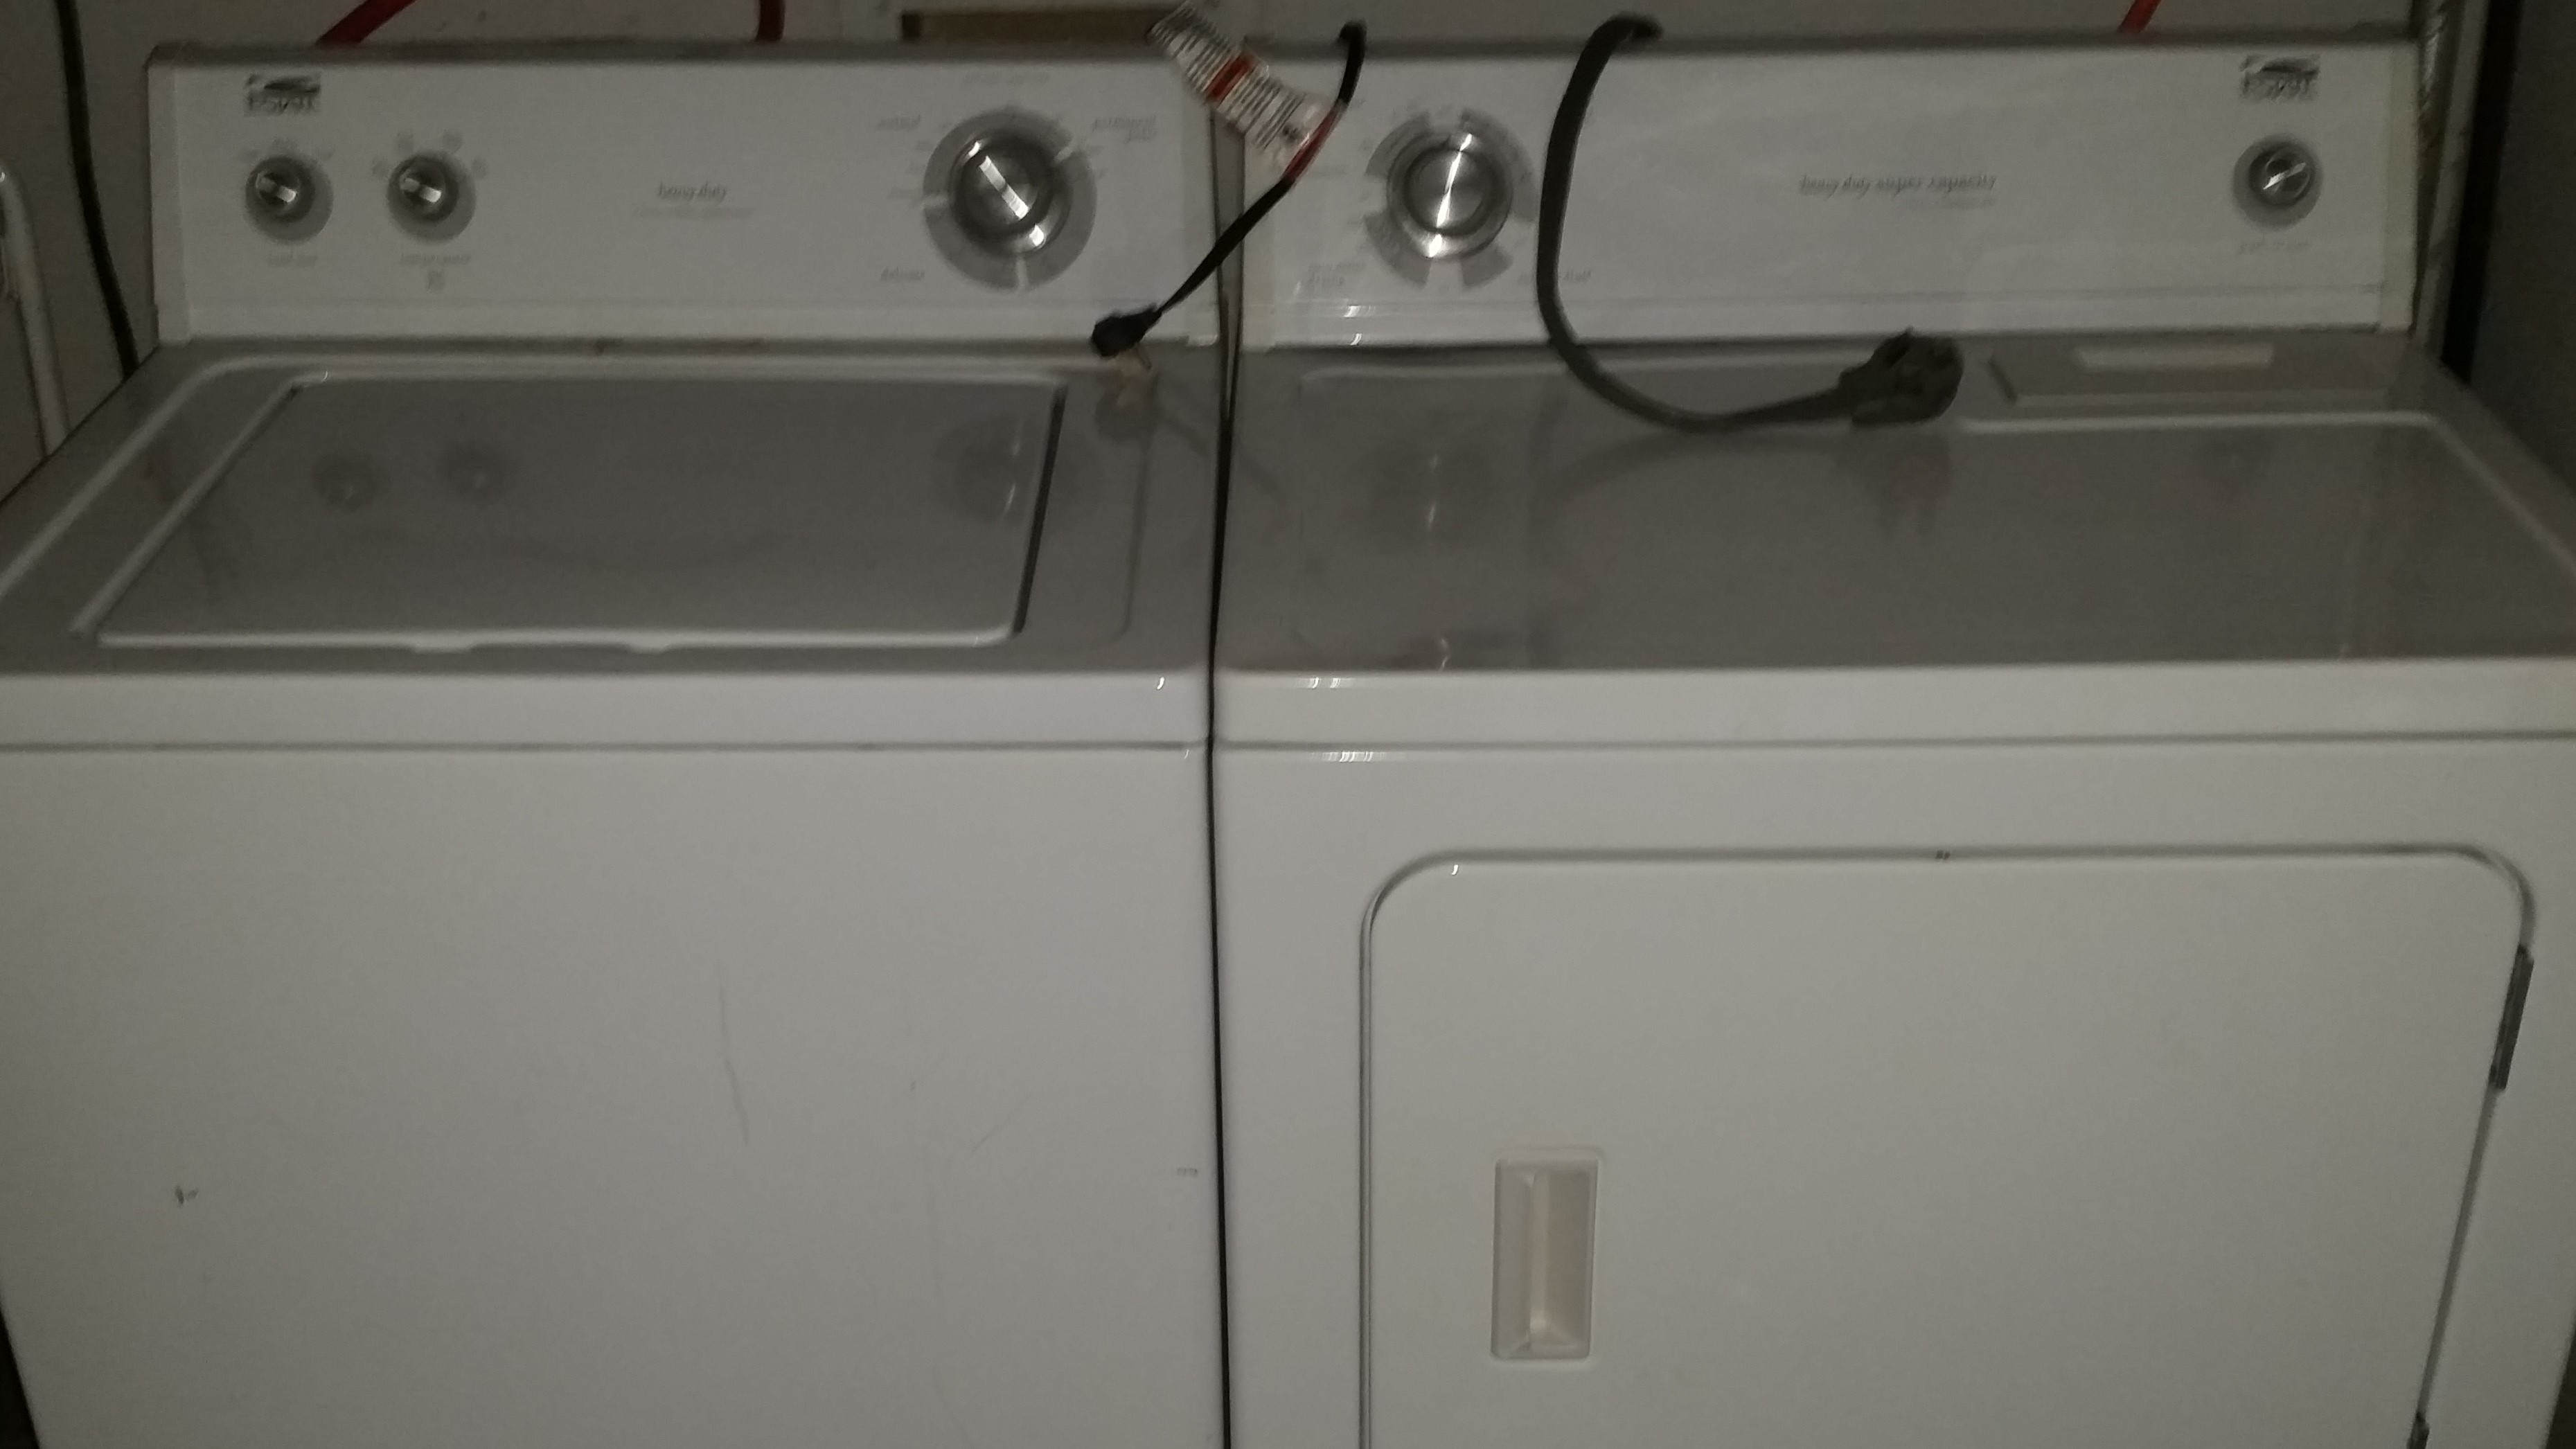 Estate by Whirlpool Washer and Dryer